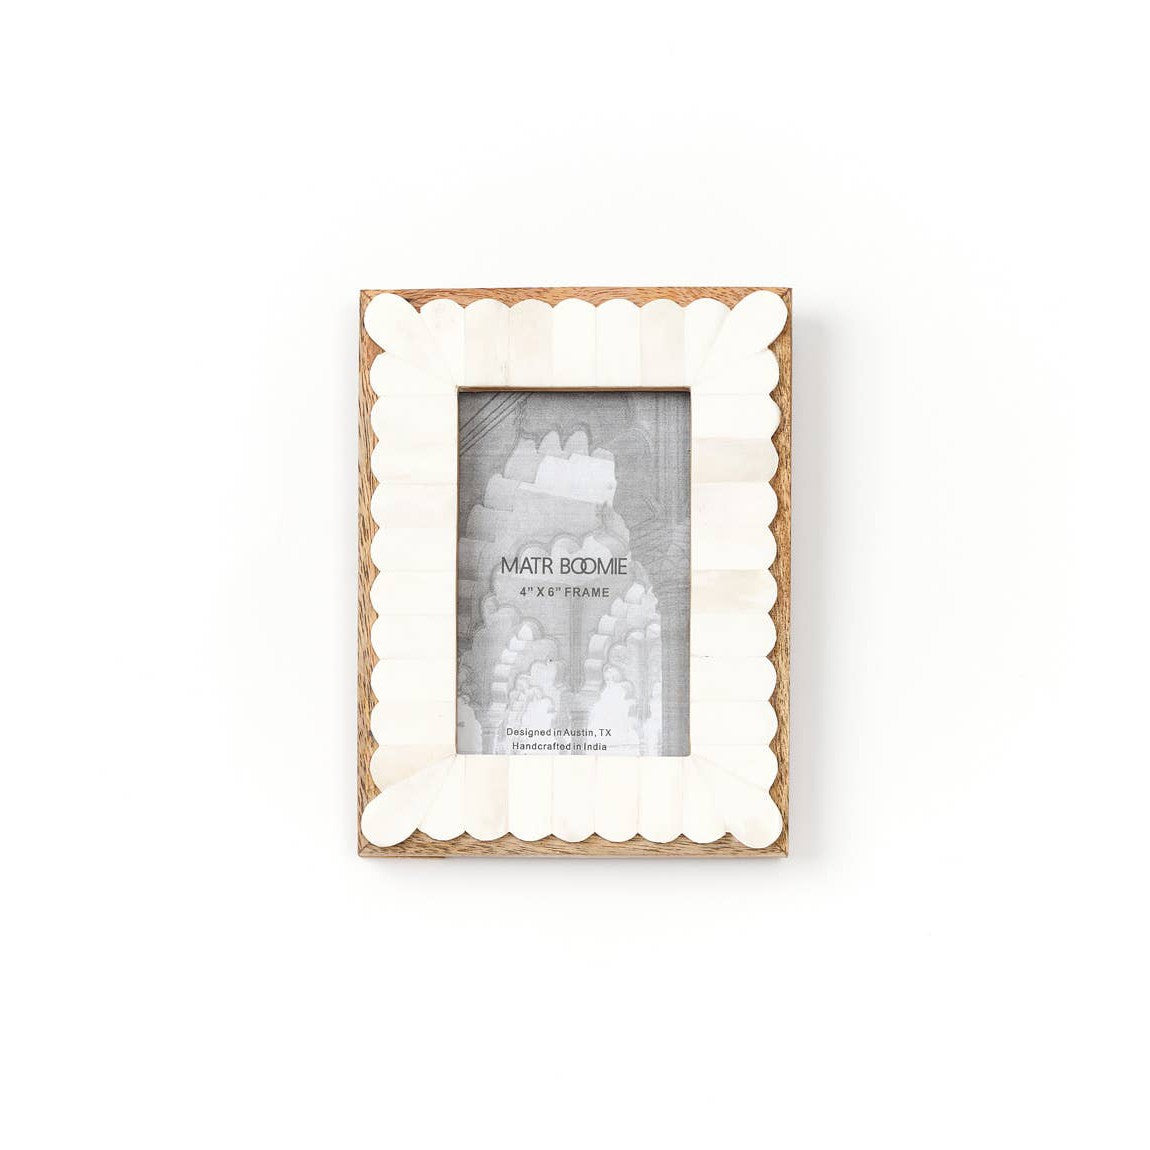 Amalesh 4x6 Picture Frame - Carved Bone, Wood